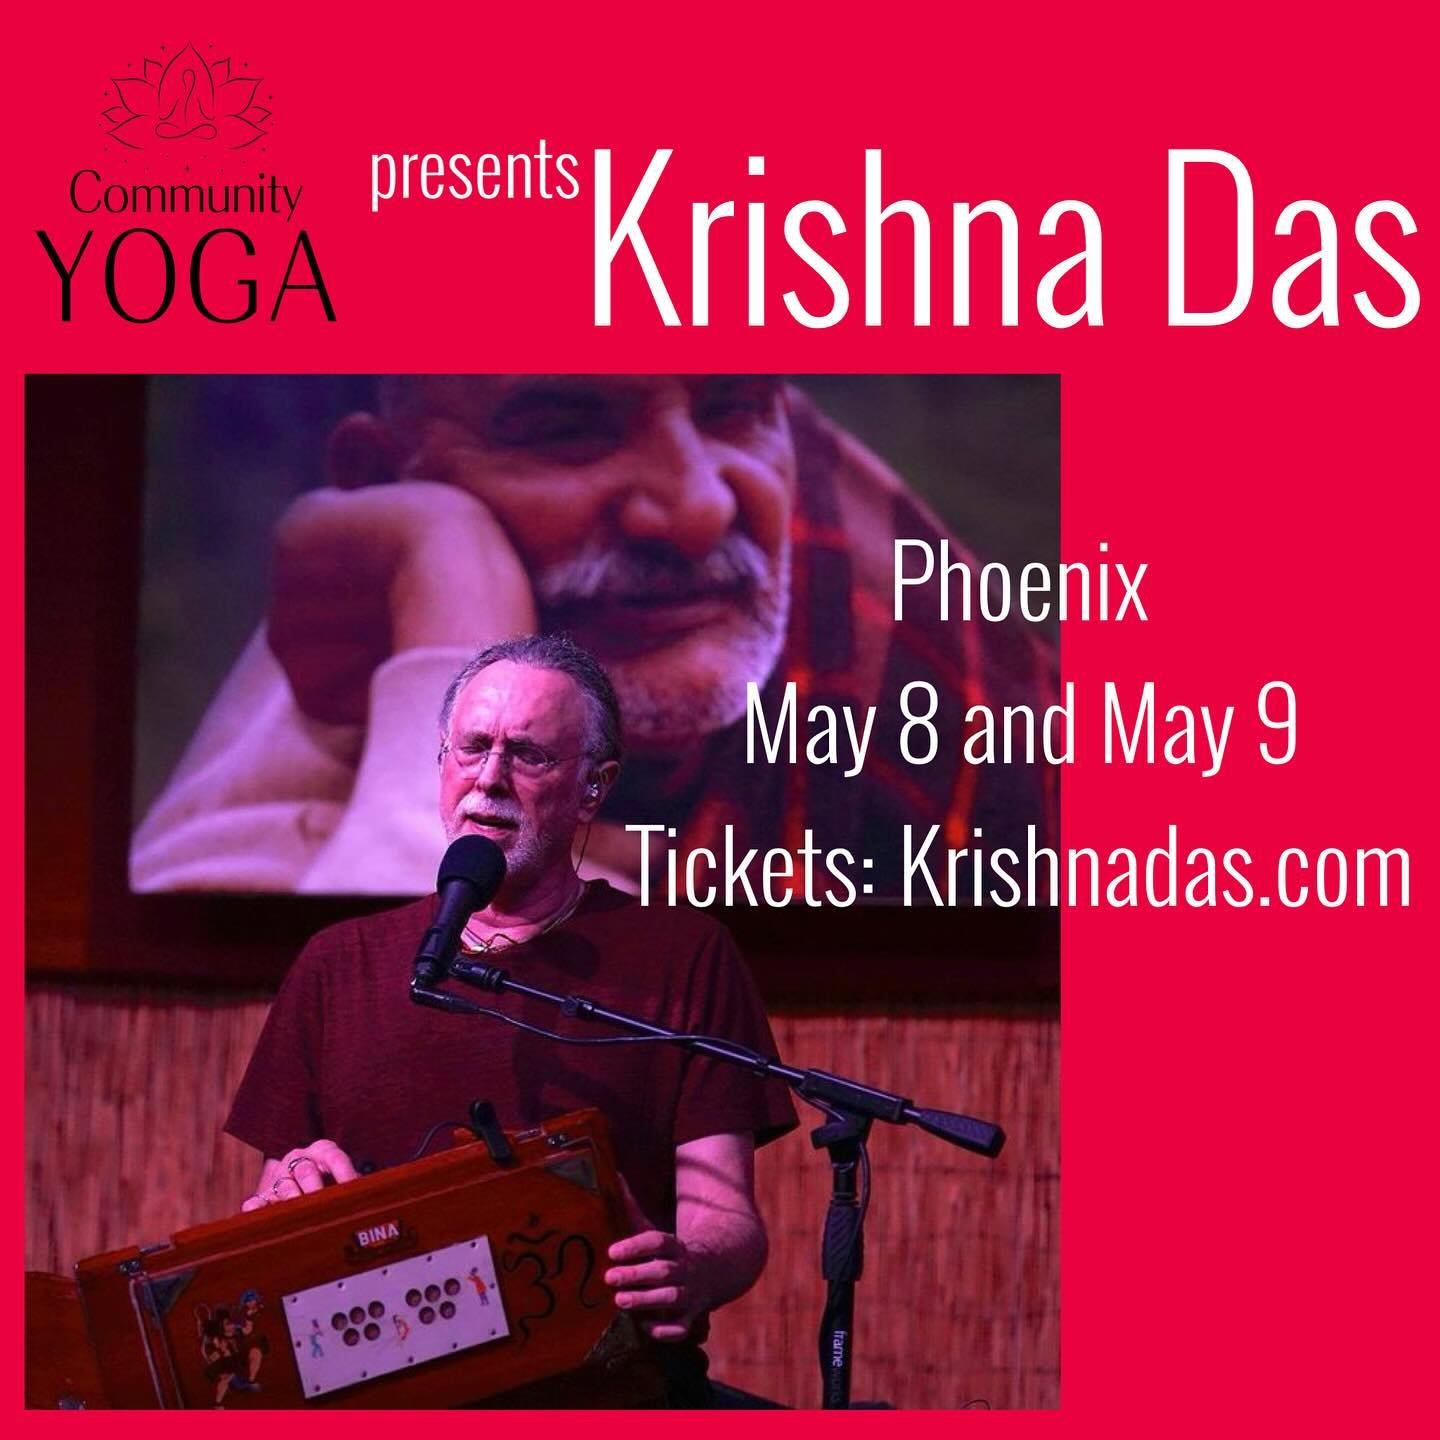 Friends! The Krishna Das Kirtan Phoenix shows are in a week! Tickets are going very fast now, get yours  at @krishnadas.com and see you on May 8th and 9th! 
.
On Thursday morning 5/9 @nina_rao will be at Community Yoga for an informal donation-based 